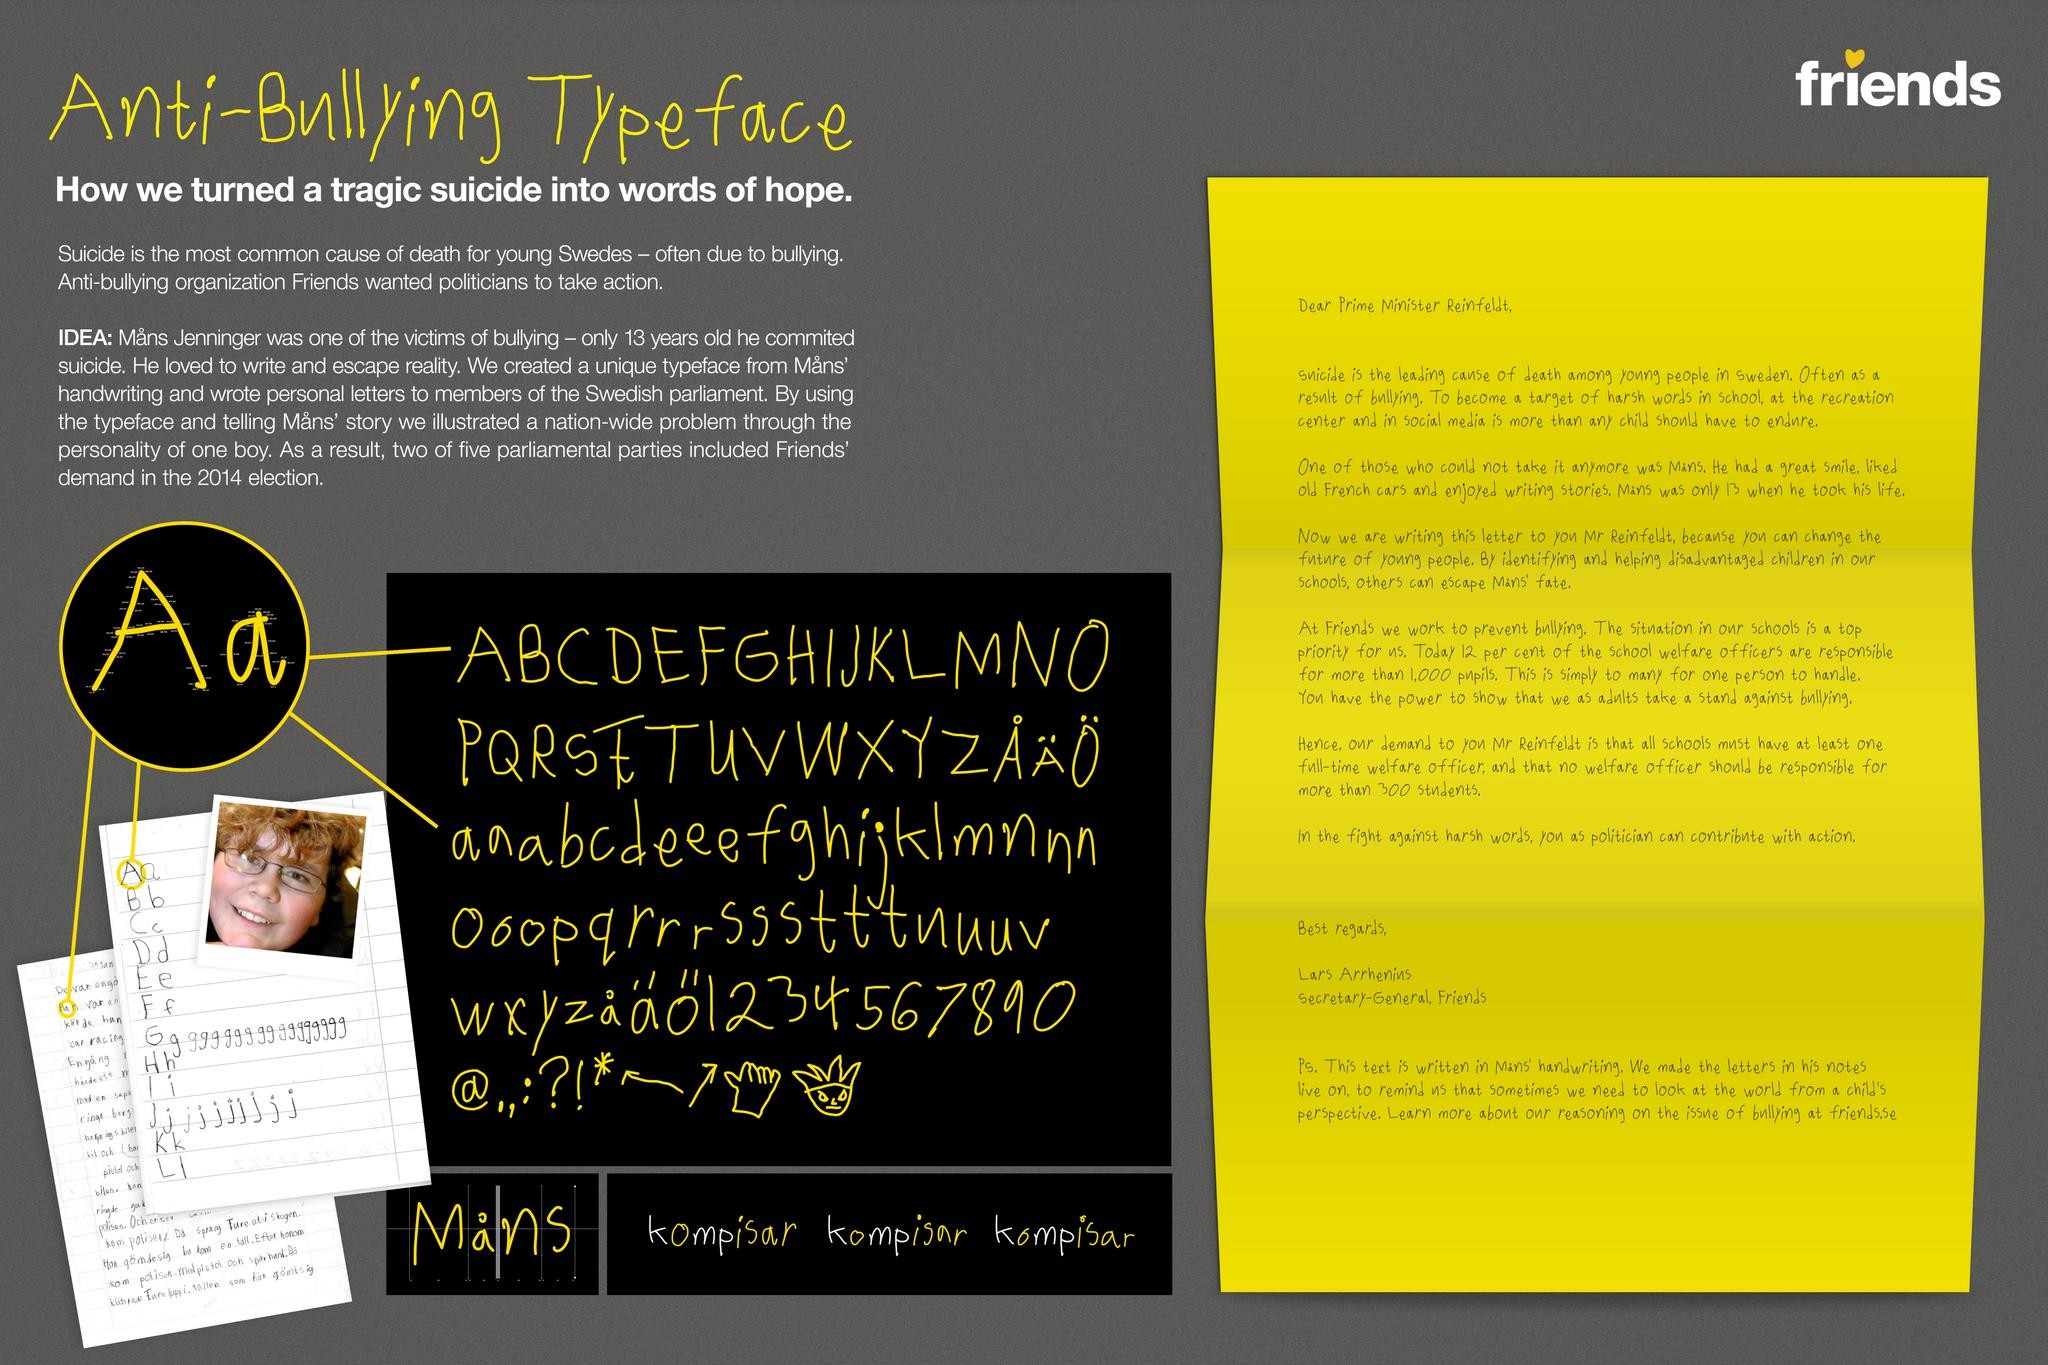 THE ANTI-BULLYING TYPEFACE